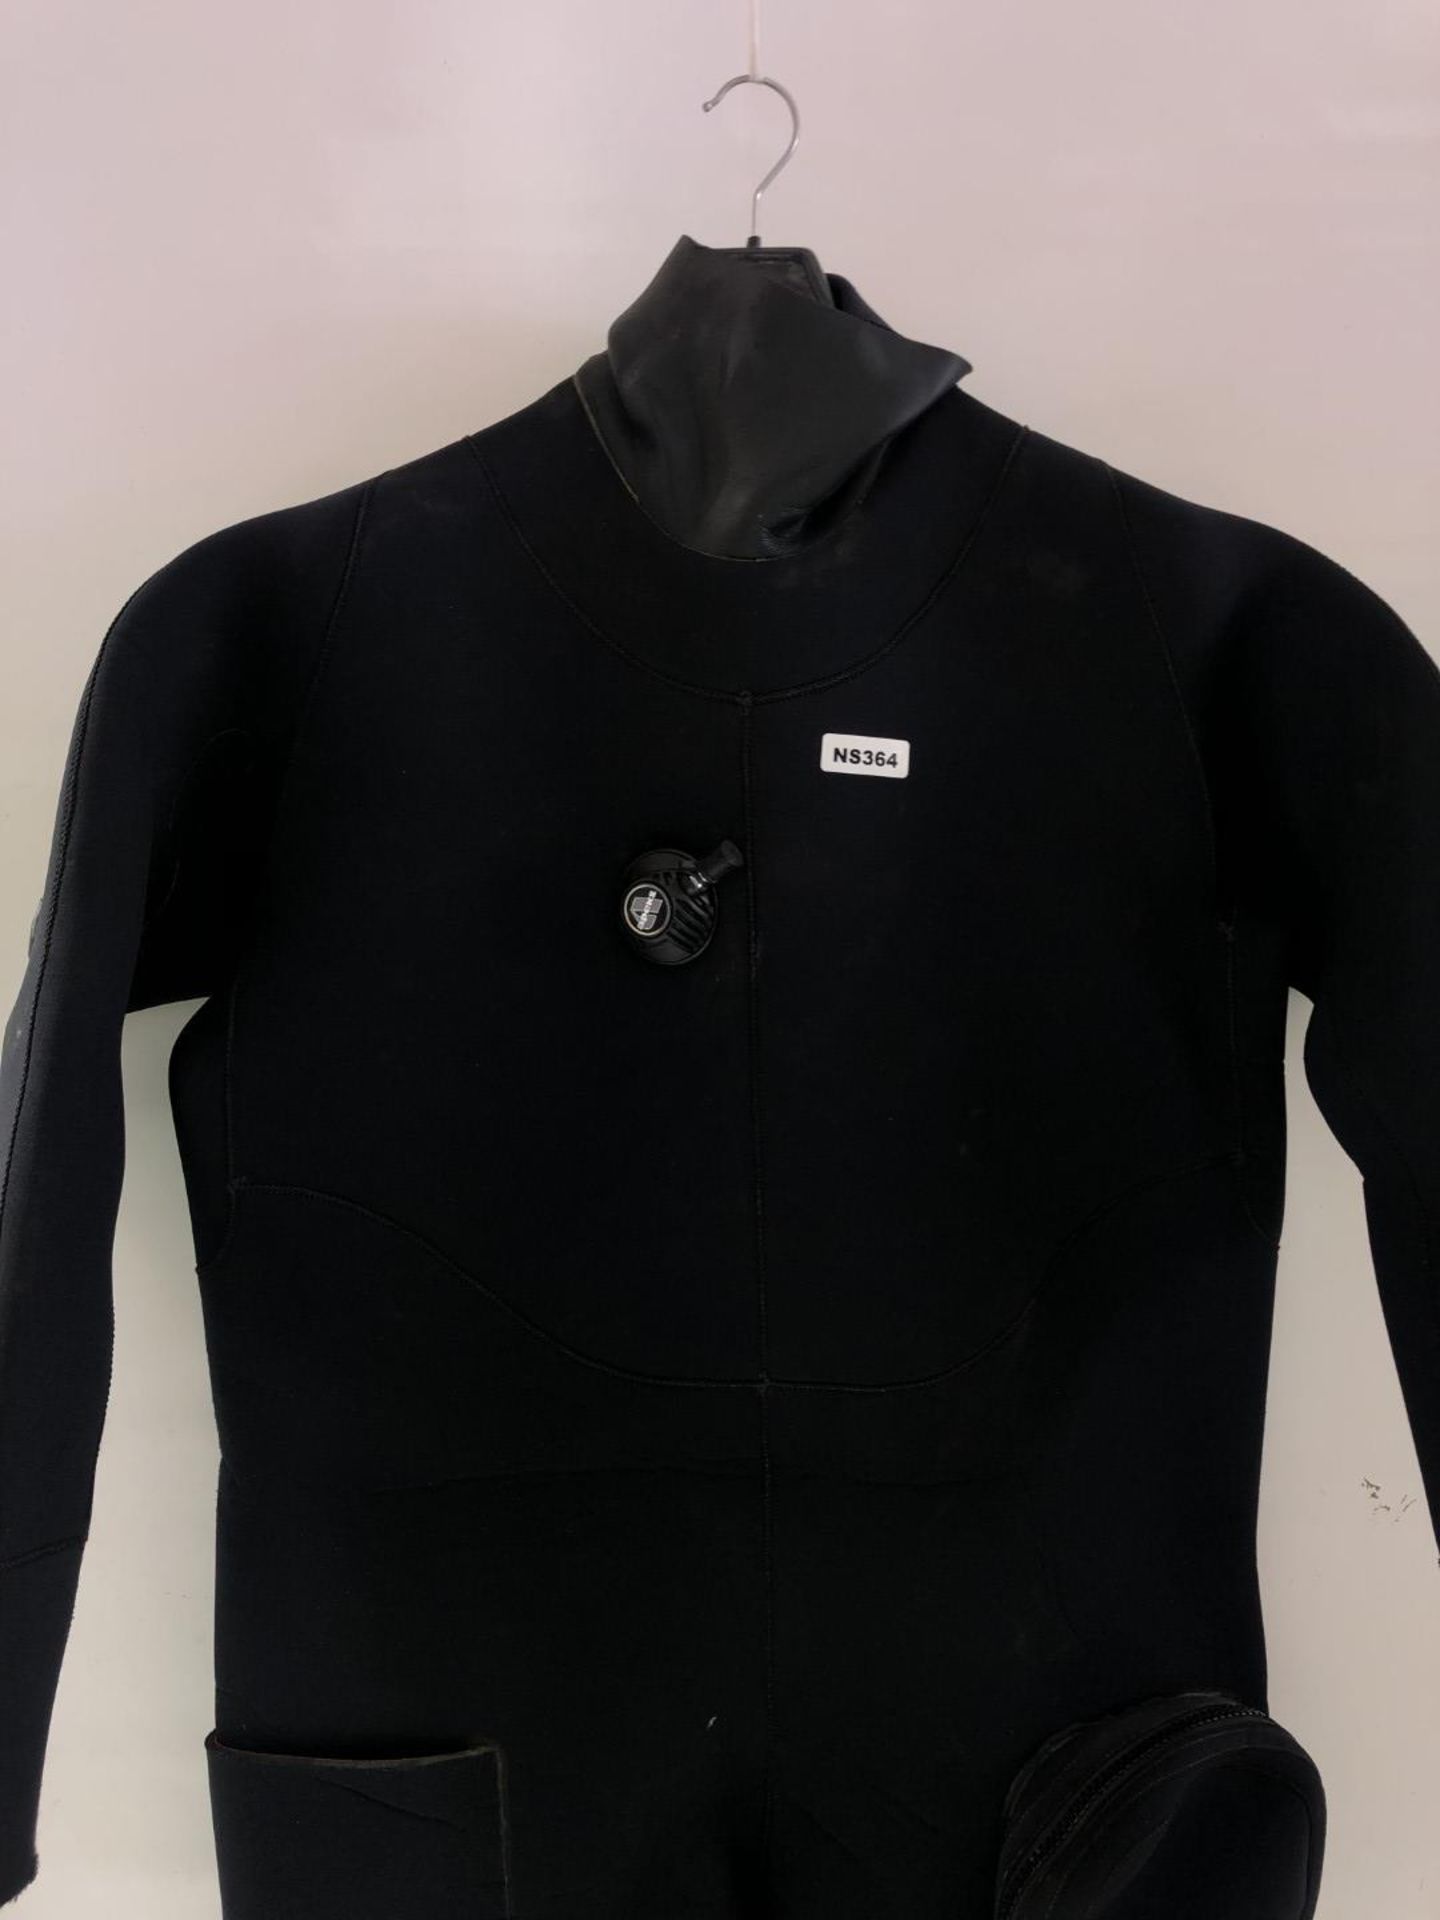 1 x Used Black Wet Suit - Size XL - Ref: NS364 - CL349 - Altrincham WA14 - Image 2 of 9